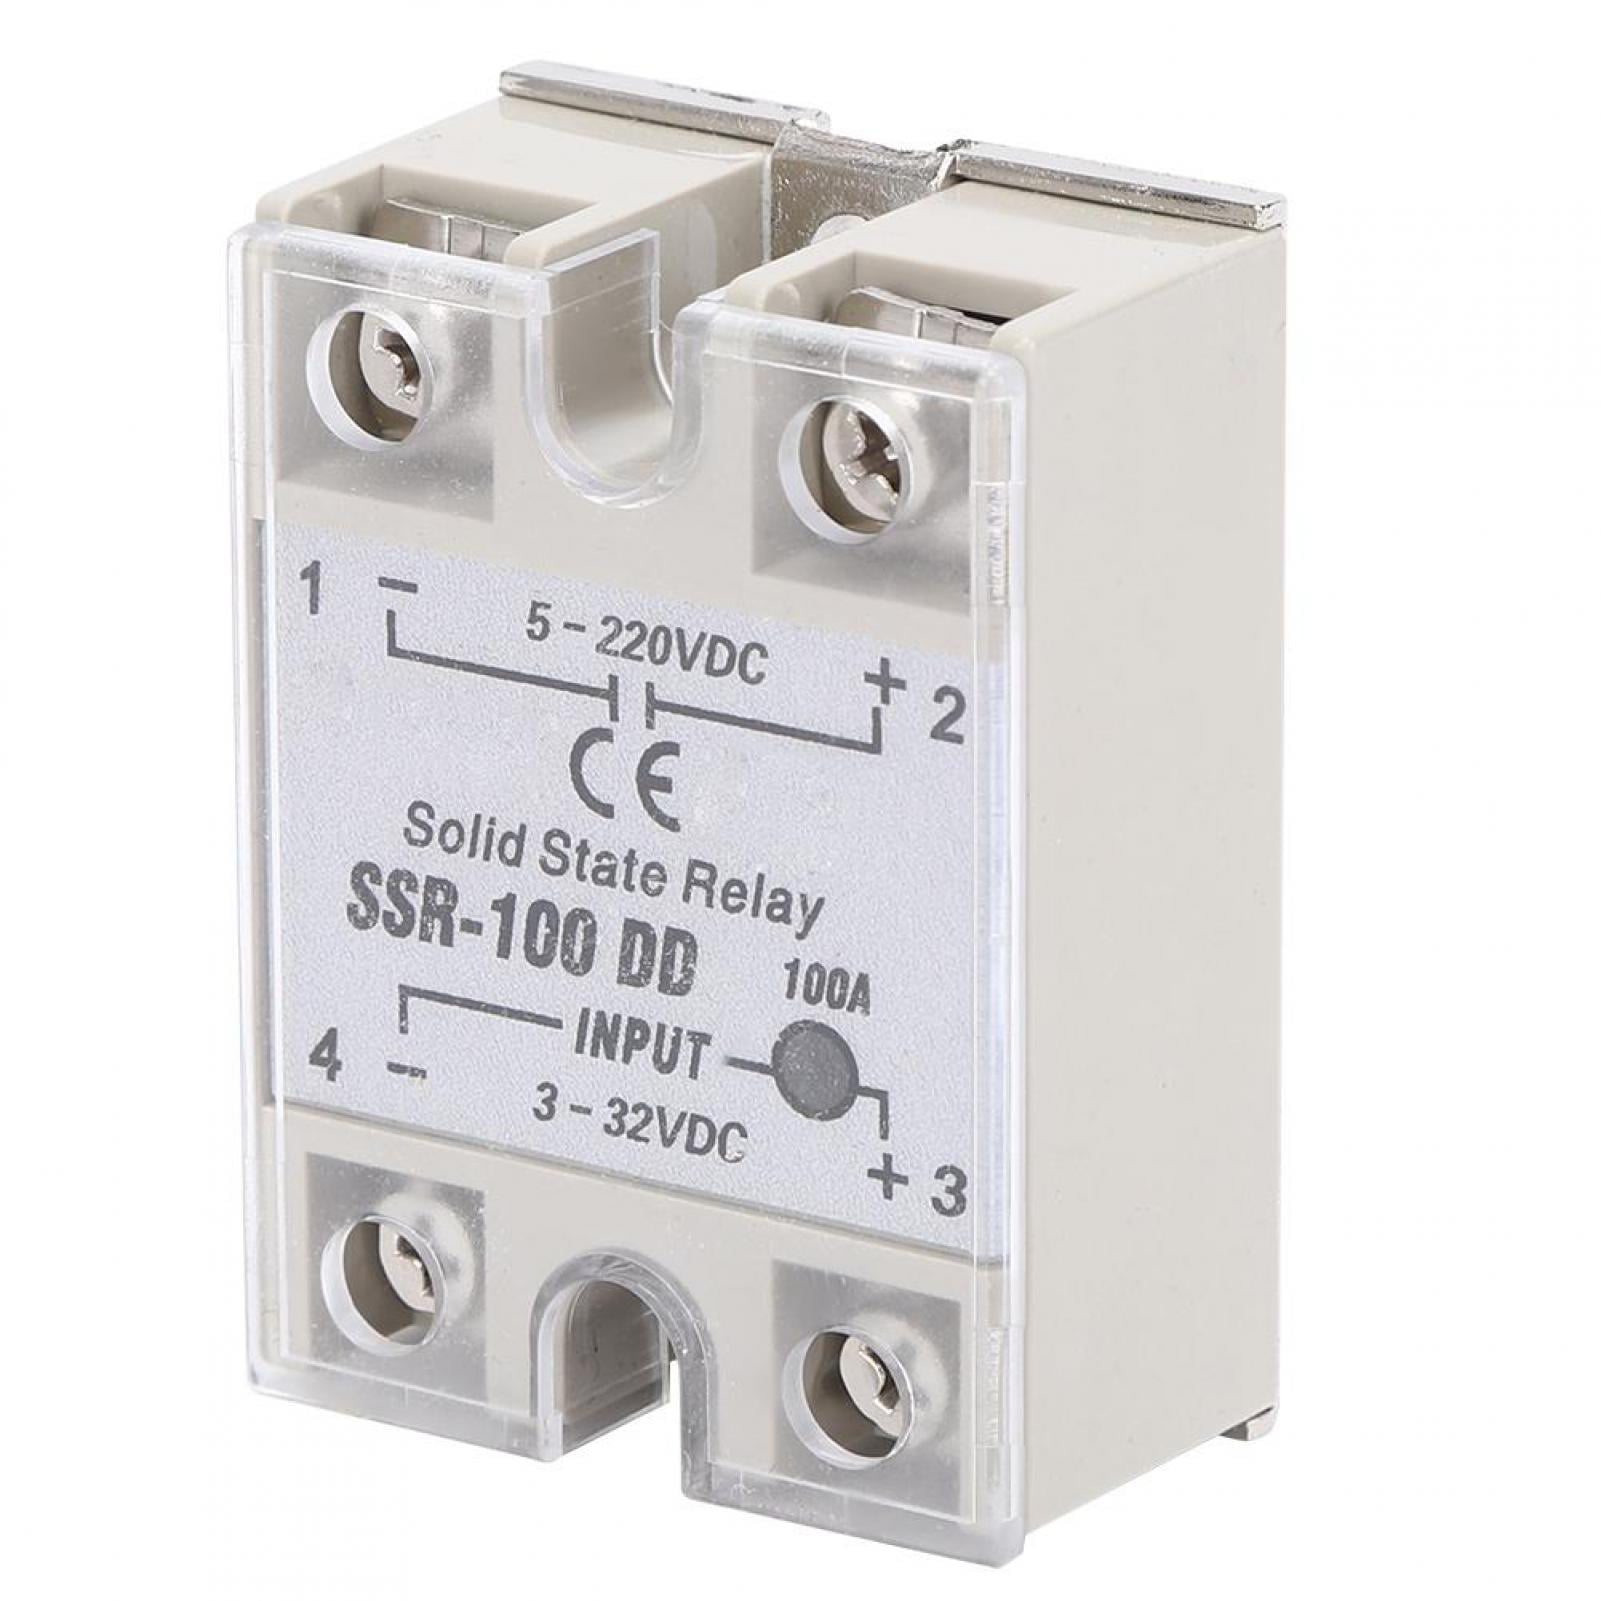 Clear Cover 10A 3-32VDC to 5-220VDC Solid State Relay SSR 